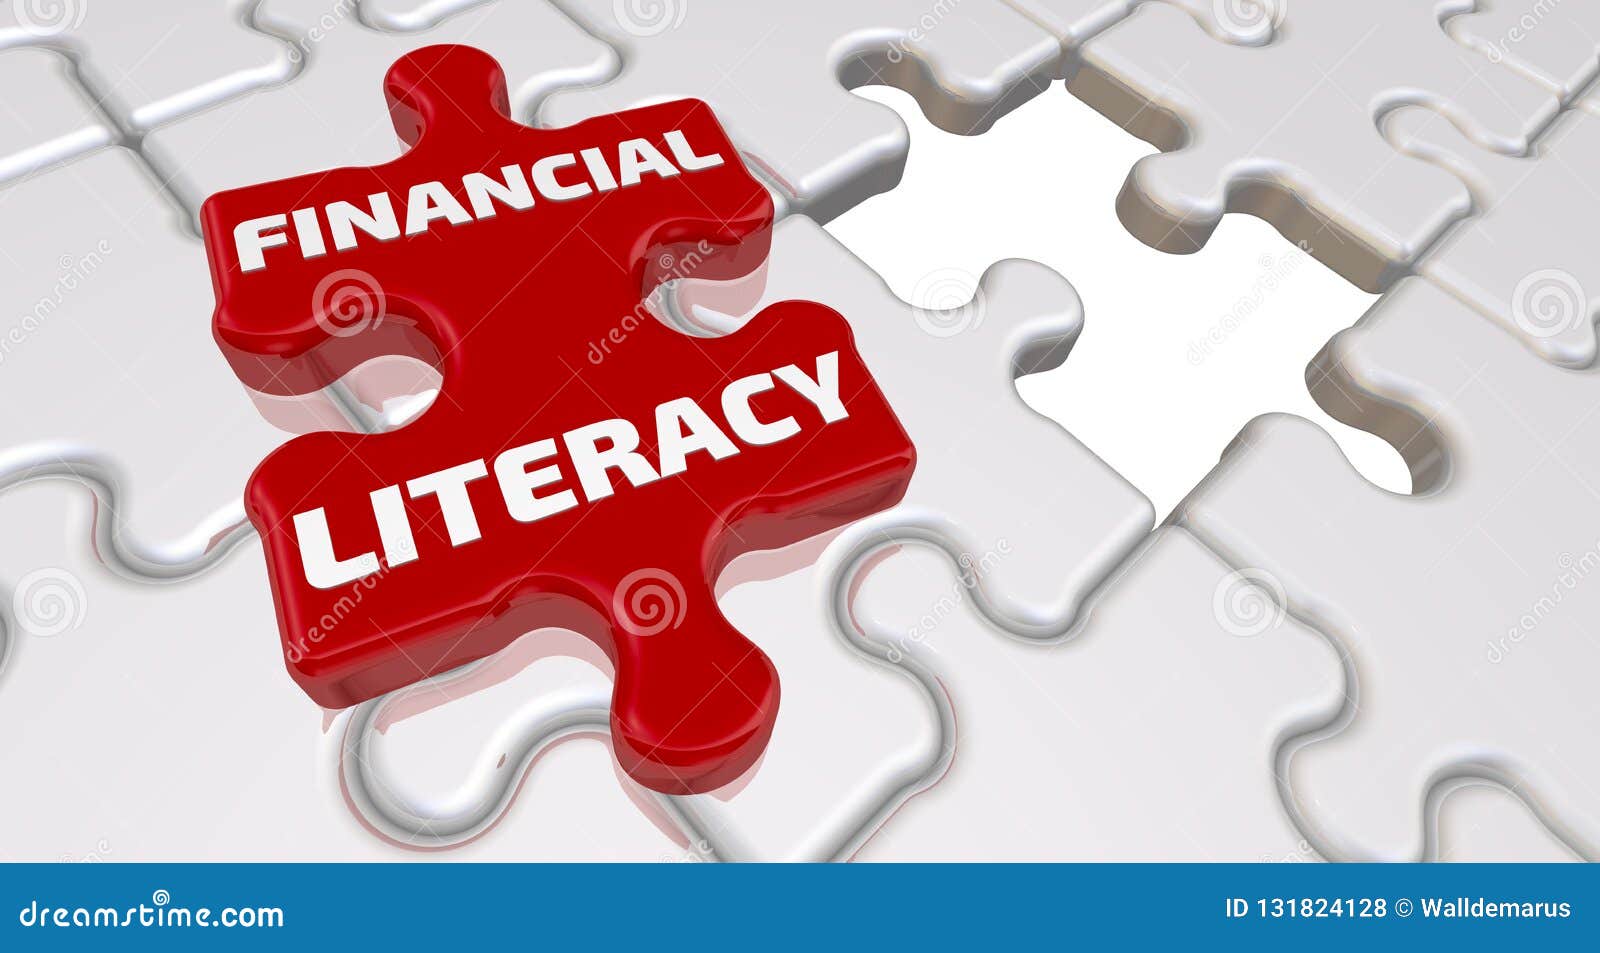 financial literacy. the inscription on the missing  of the puzzle